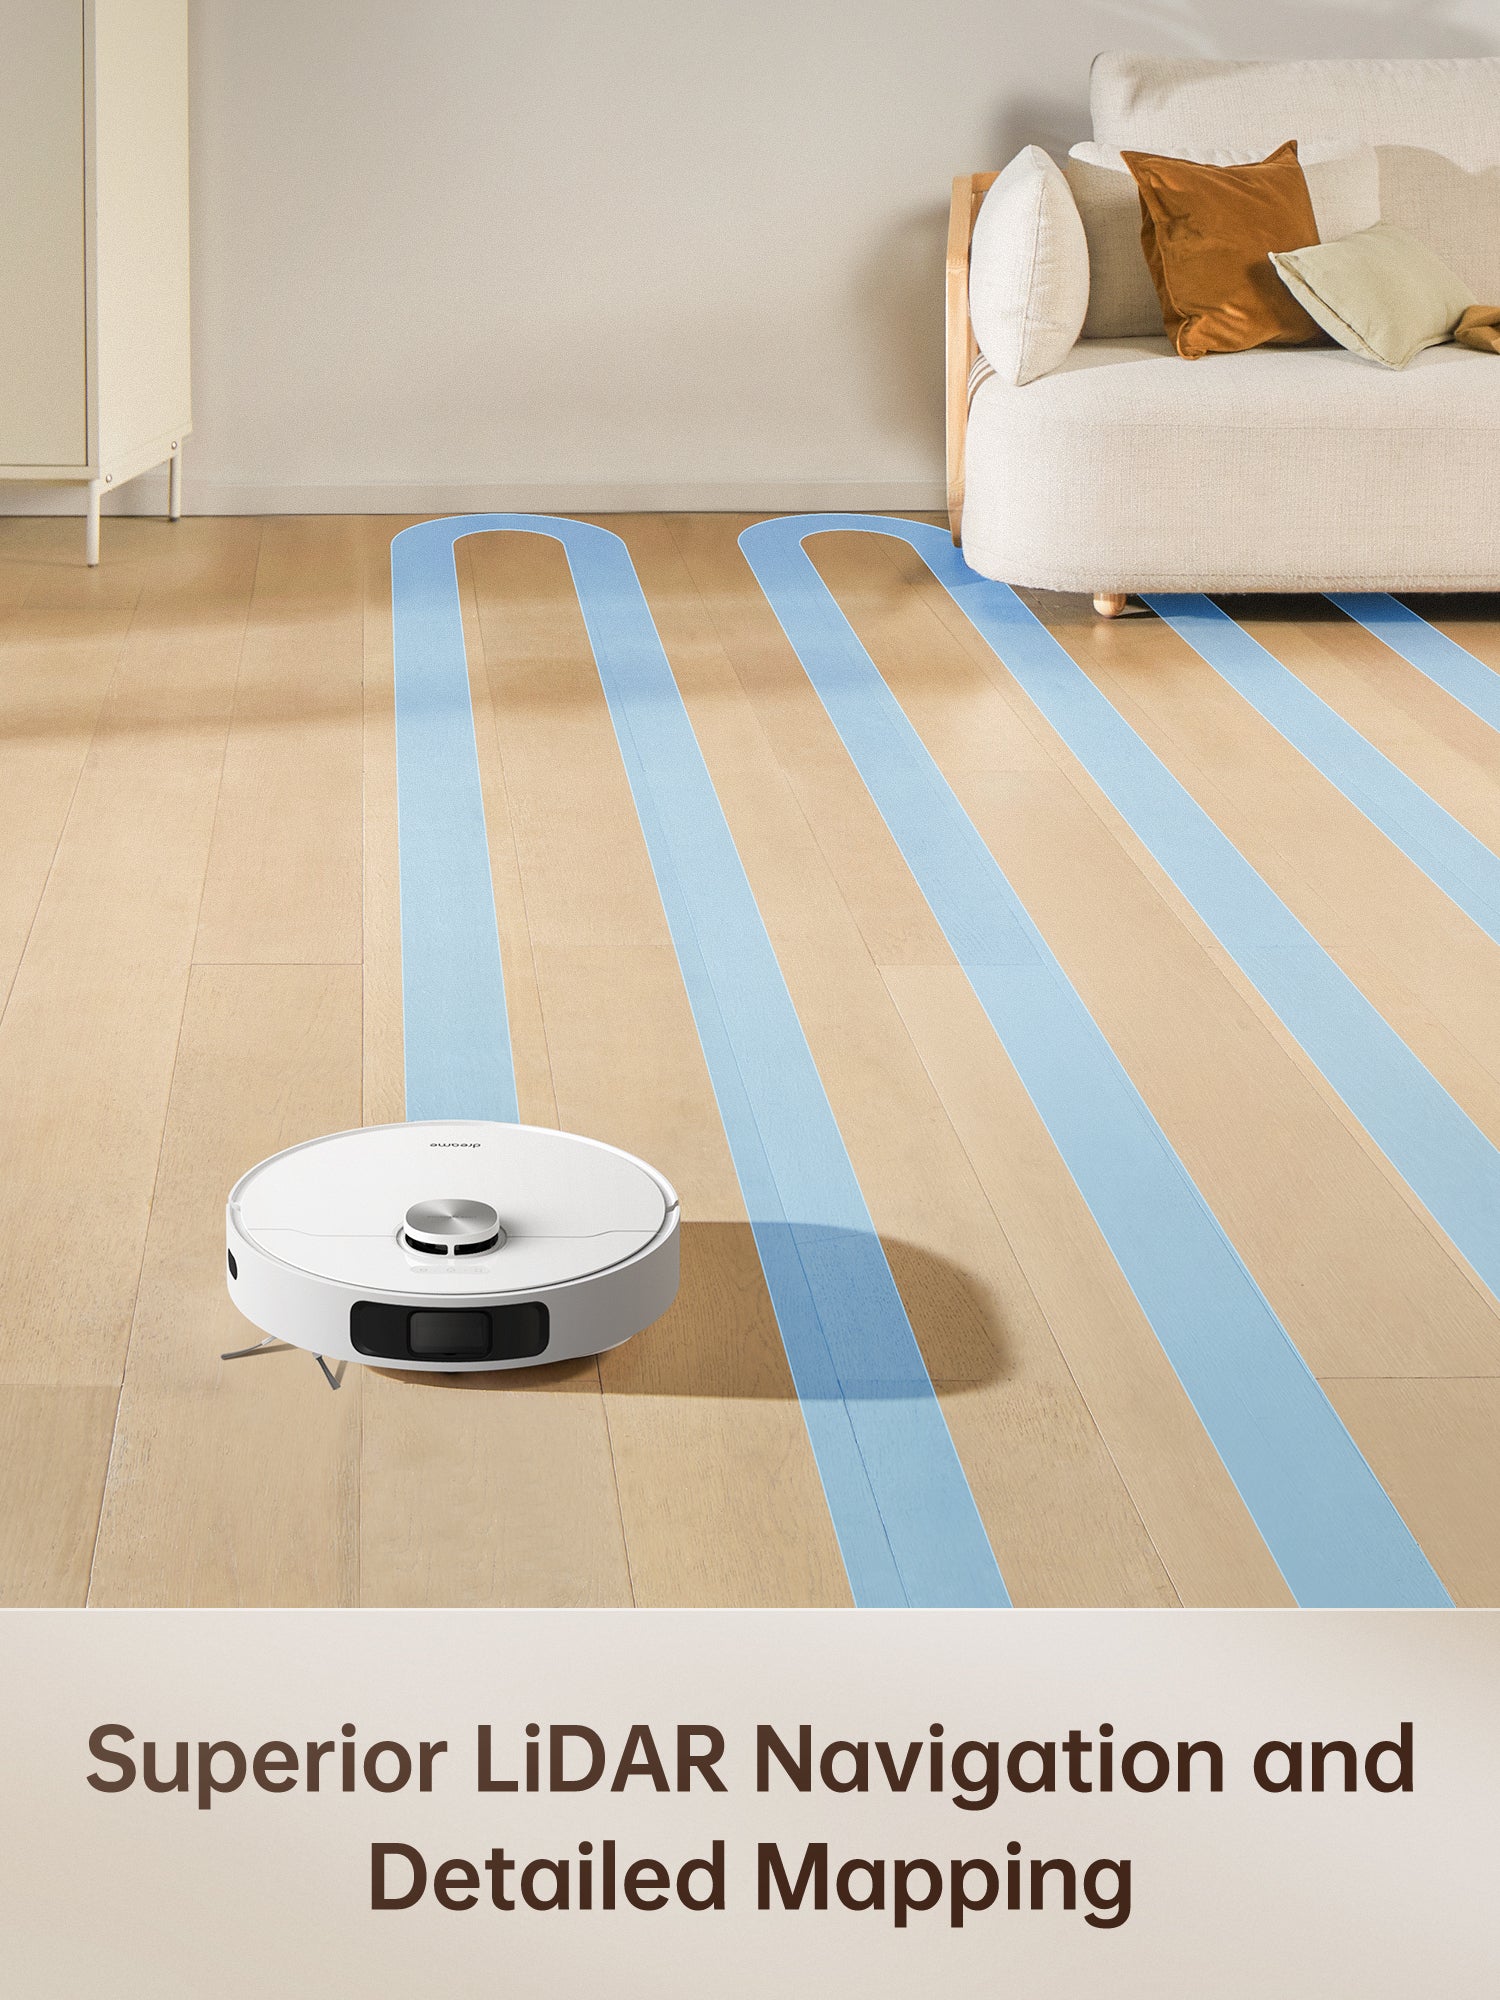 e-Tax  43.18% OFF on DREAME White Dreame 10 Pro Robot Vacuum Cleaner